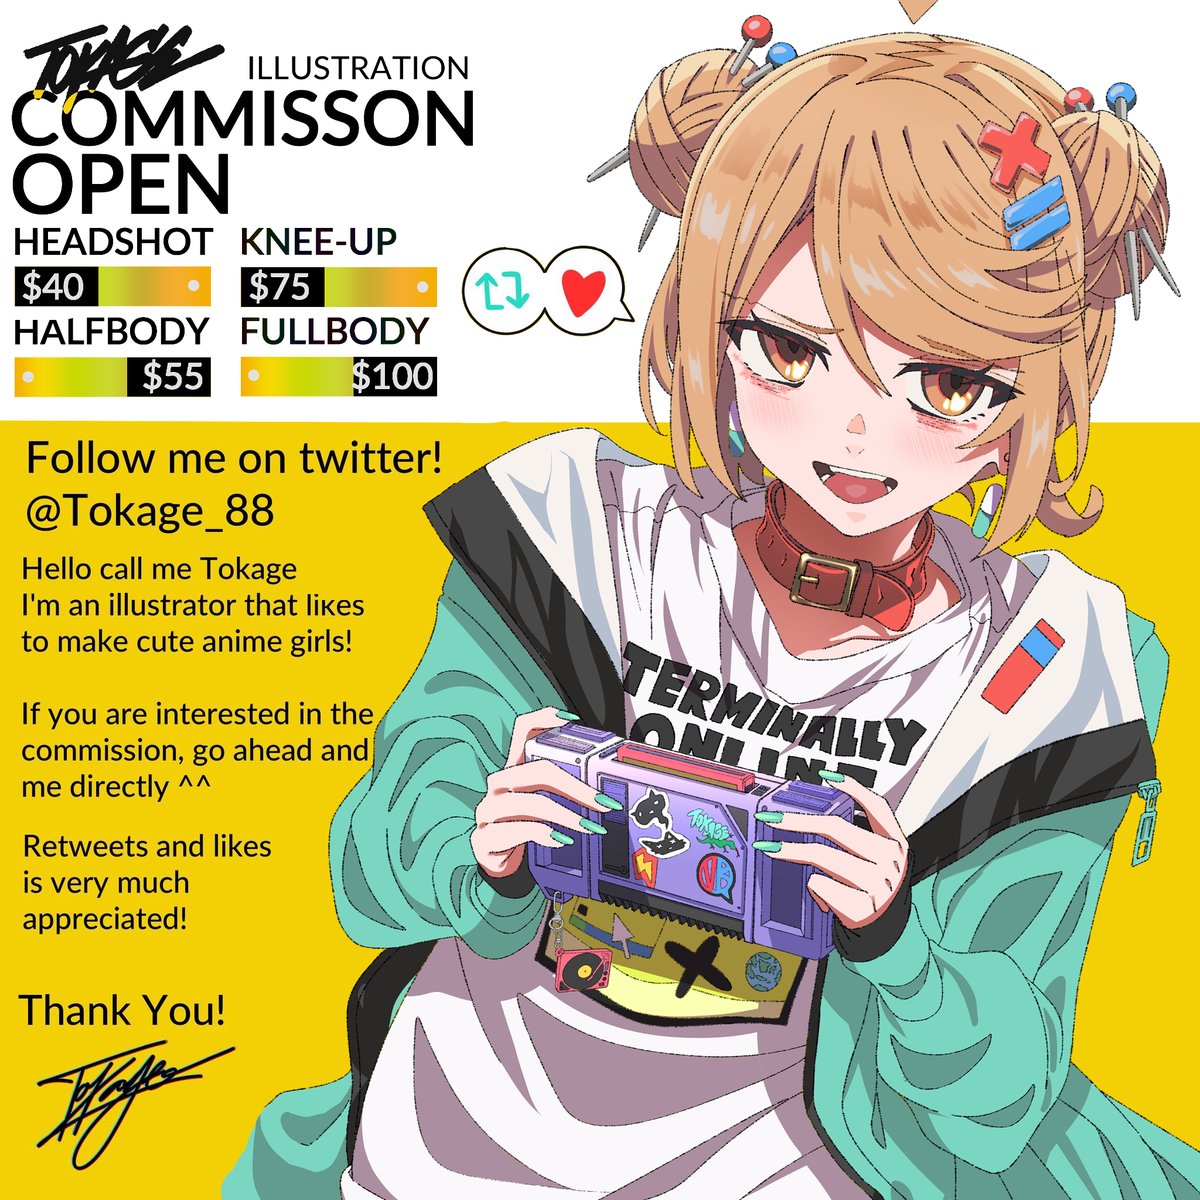 Commission open! Queue is open for may-june batch!✨ Open for 4 slots! 2/4 slot taken DM for more info! starts from : $40 (Headshot) $55 (halfbody) $75 (kneeup) $100 (fullbody) Retweets are appreciated📷 NSFW ok! #commissionsopen #commissions #anime #illustration